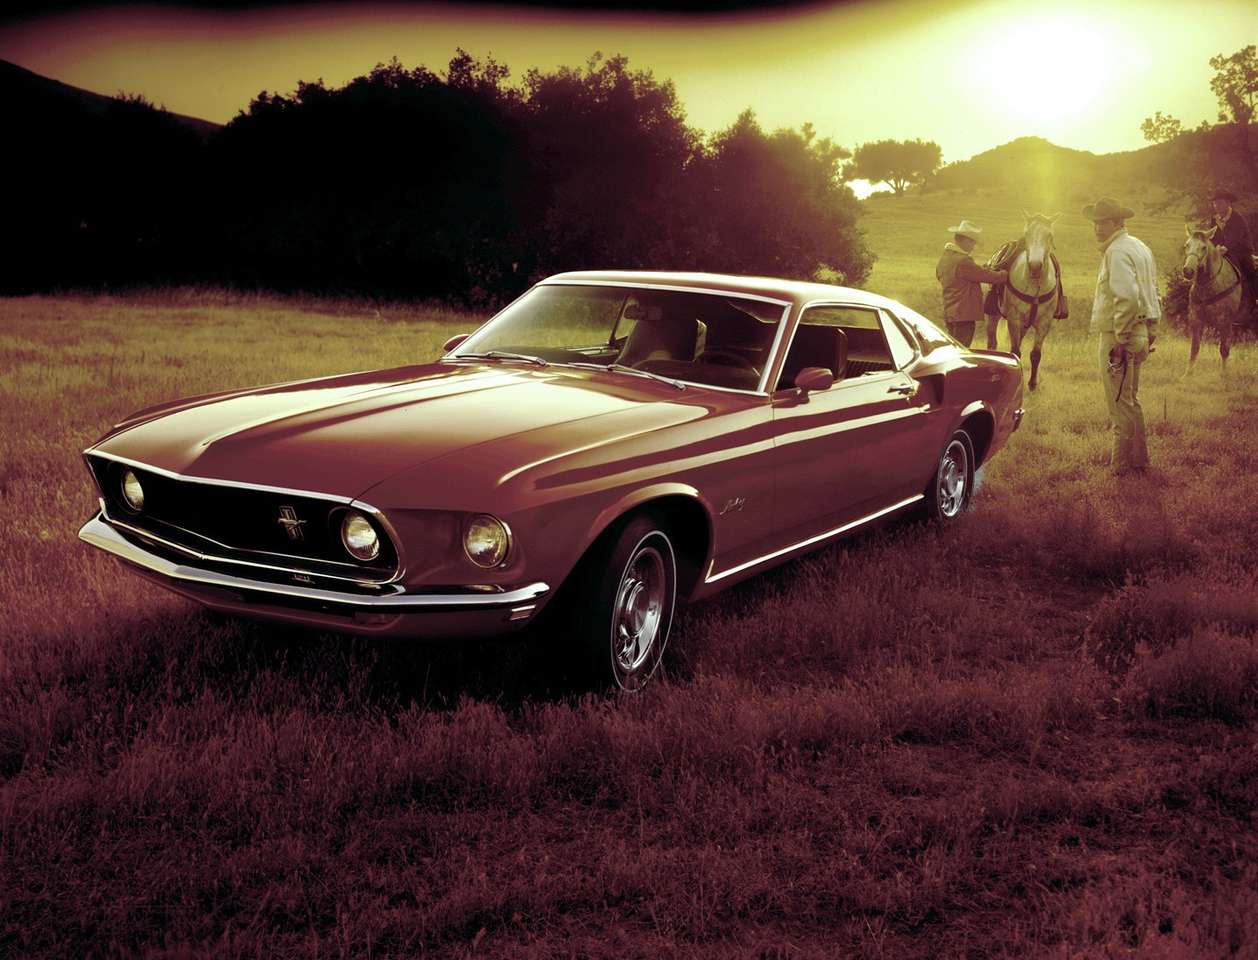 1969 Ford Mustang Fastback online puzzle